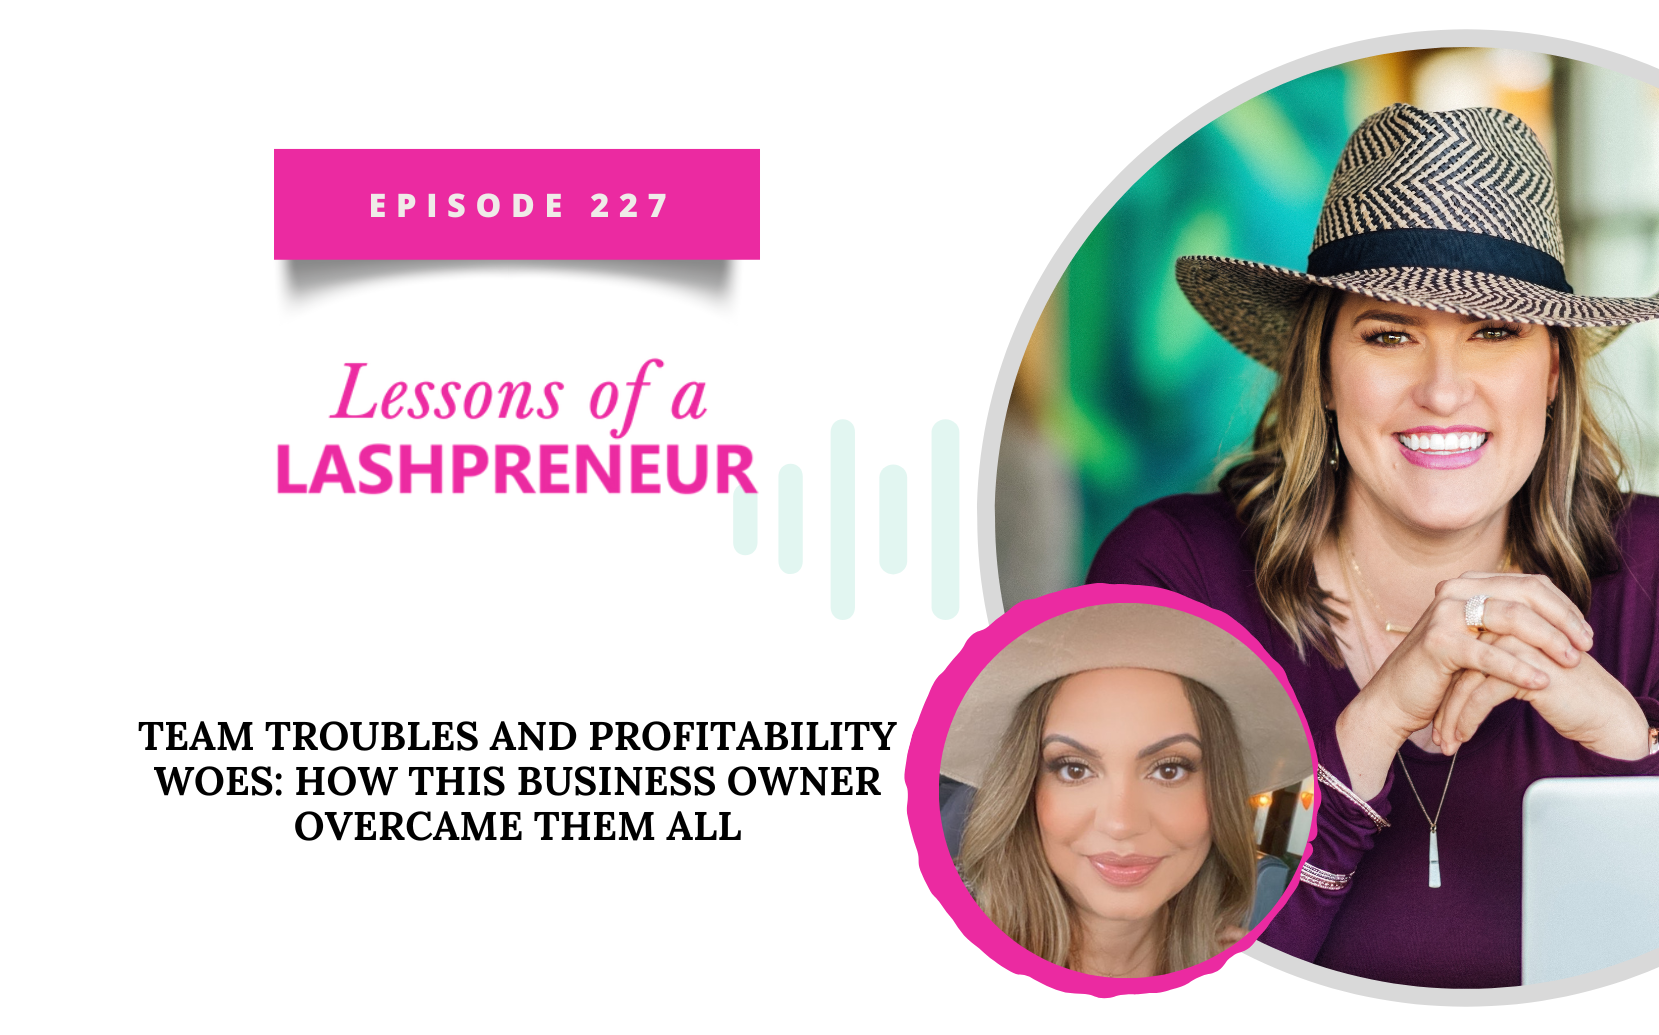 Team Troubles and Profitability Woes: How This Business Owner Overcame Them All